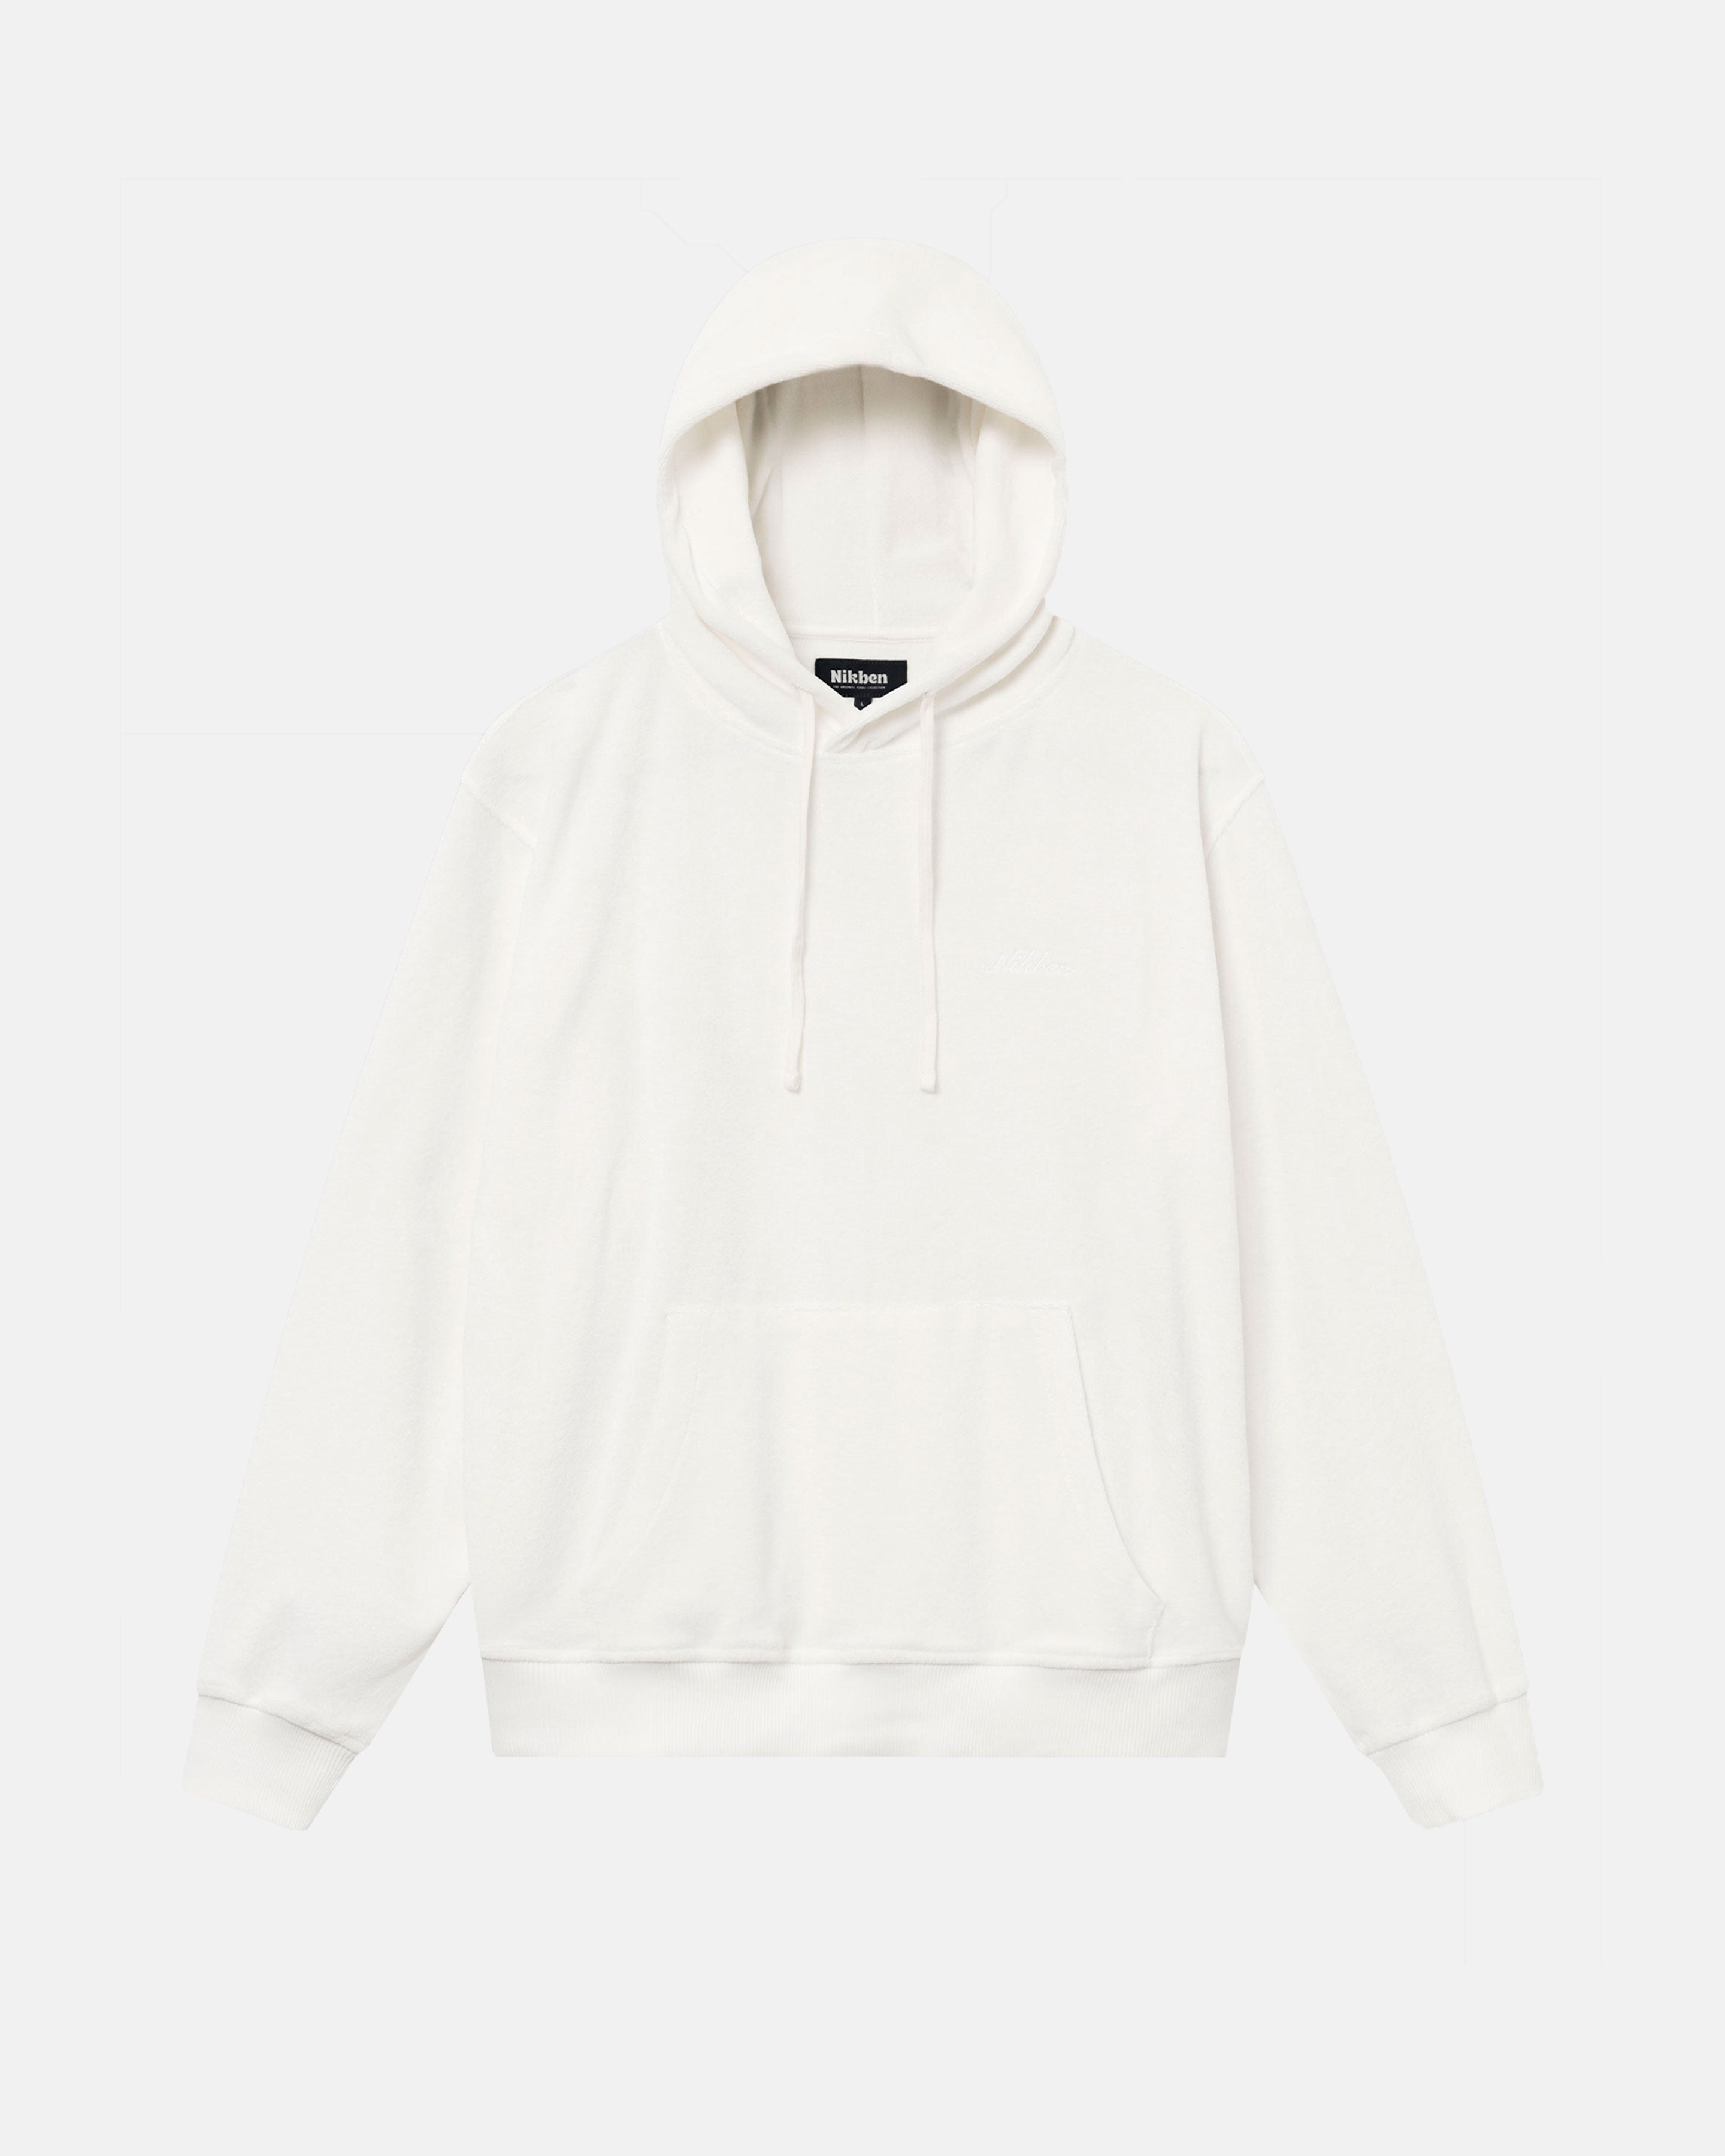 Off White hoodie made from terry toweling cloth. It features drawstrings, a single front pocket, and a white embroidered 